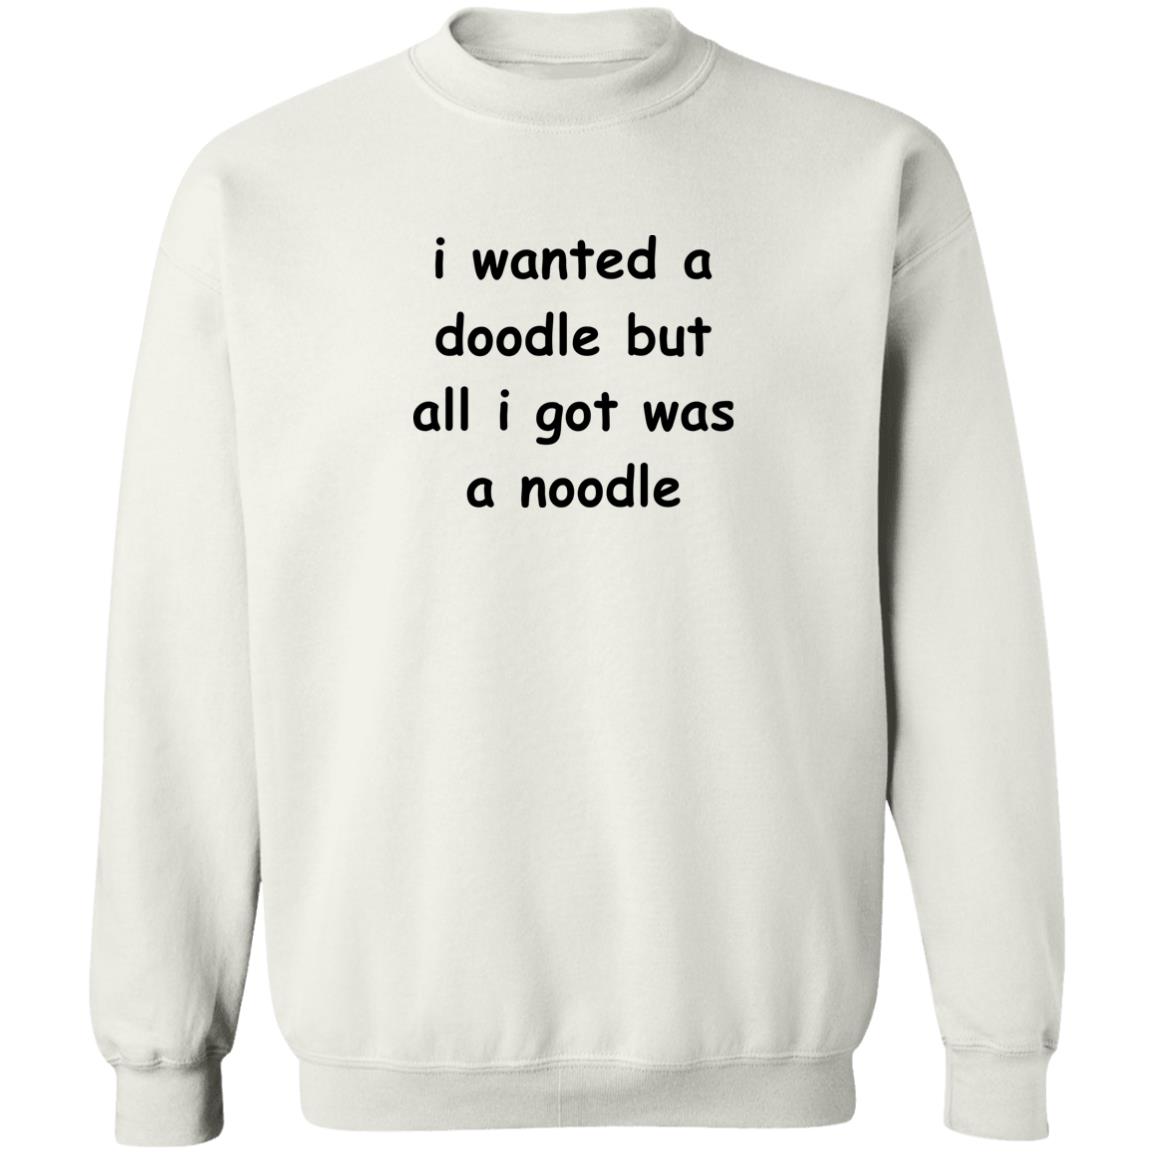 I Wanted A Doodle But All I Got Was A Noodle Shirt 1